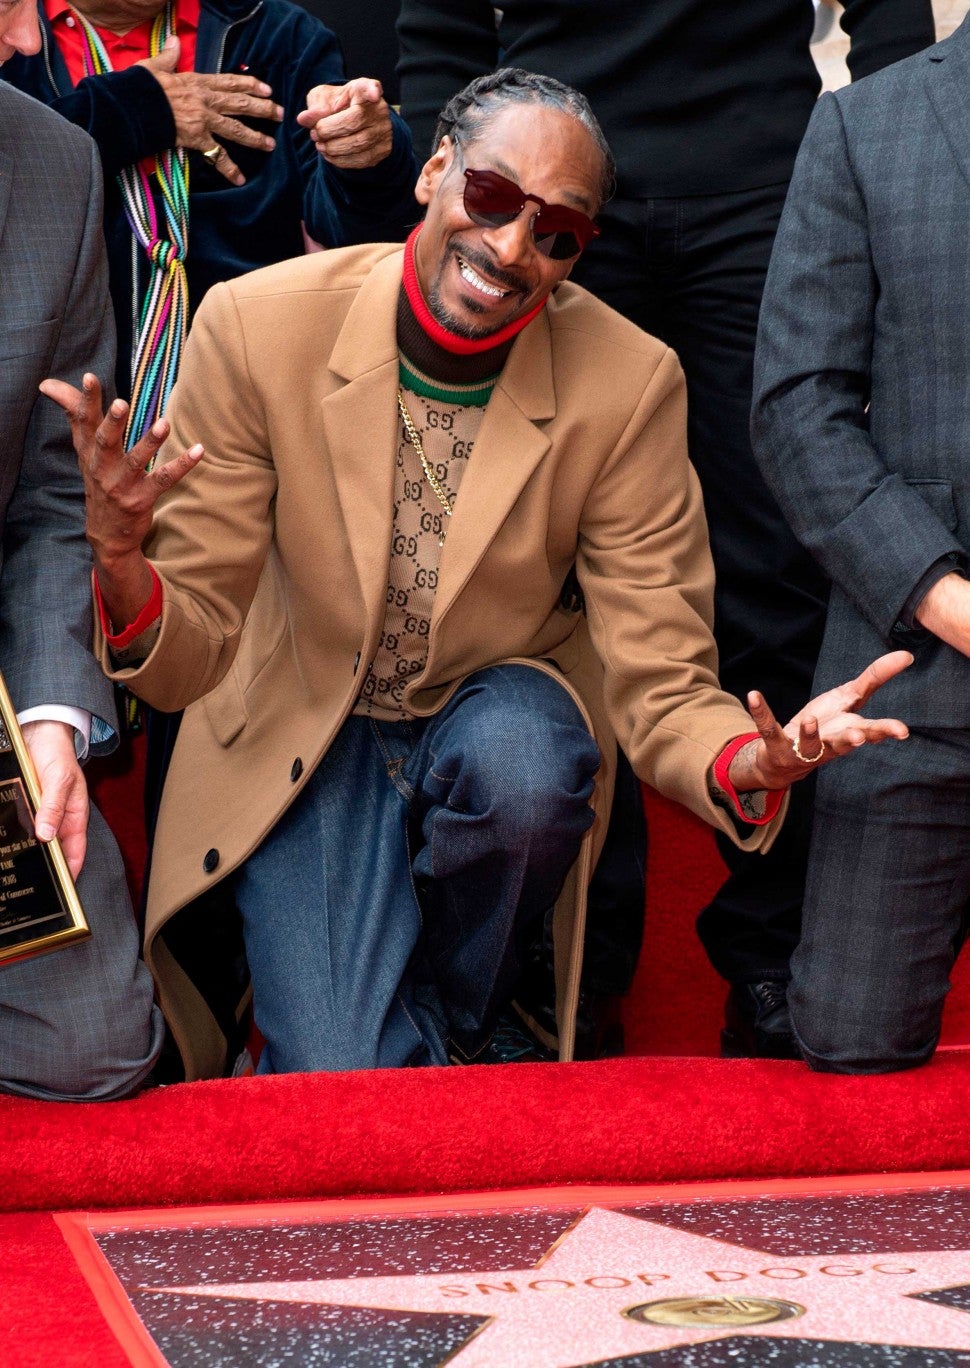 Snoop Dogg gets his star on the Hollywood Walk of Fame on Nov. 19